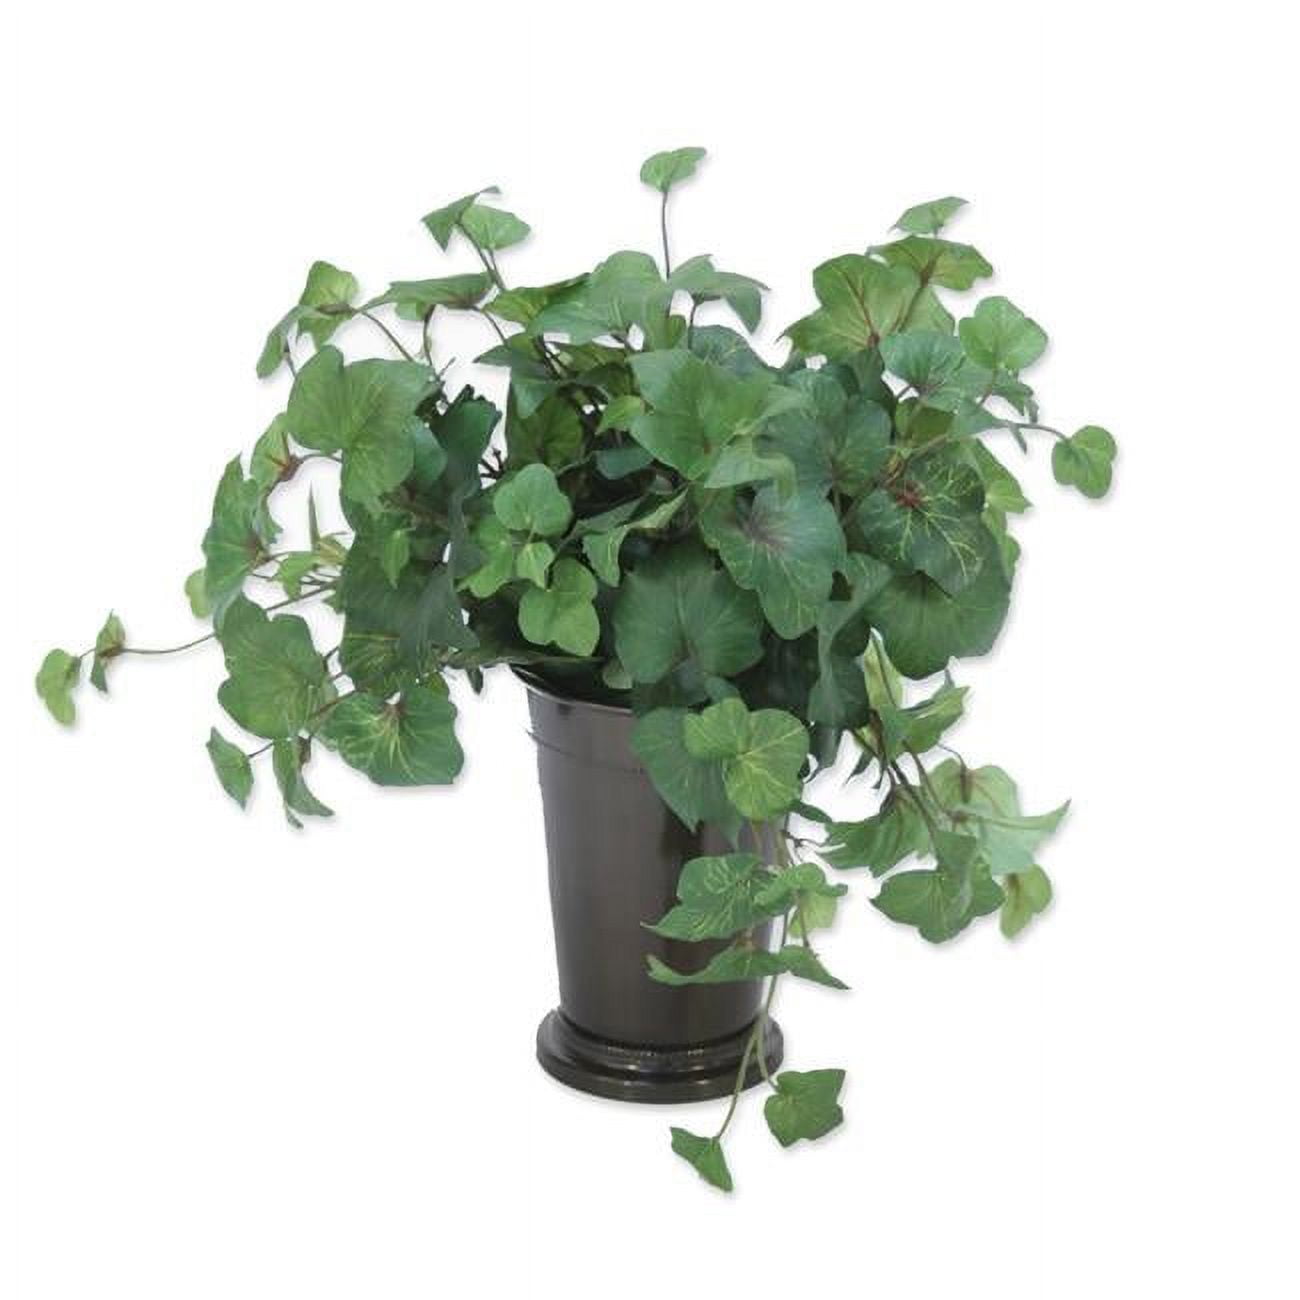 Picture of Disttive Designs 8203 Unisex Hedera Ivy in Mint Julep Vase - Green